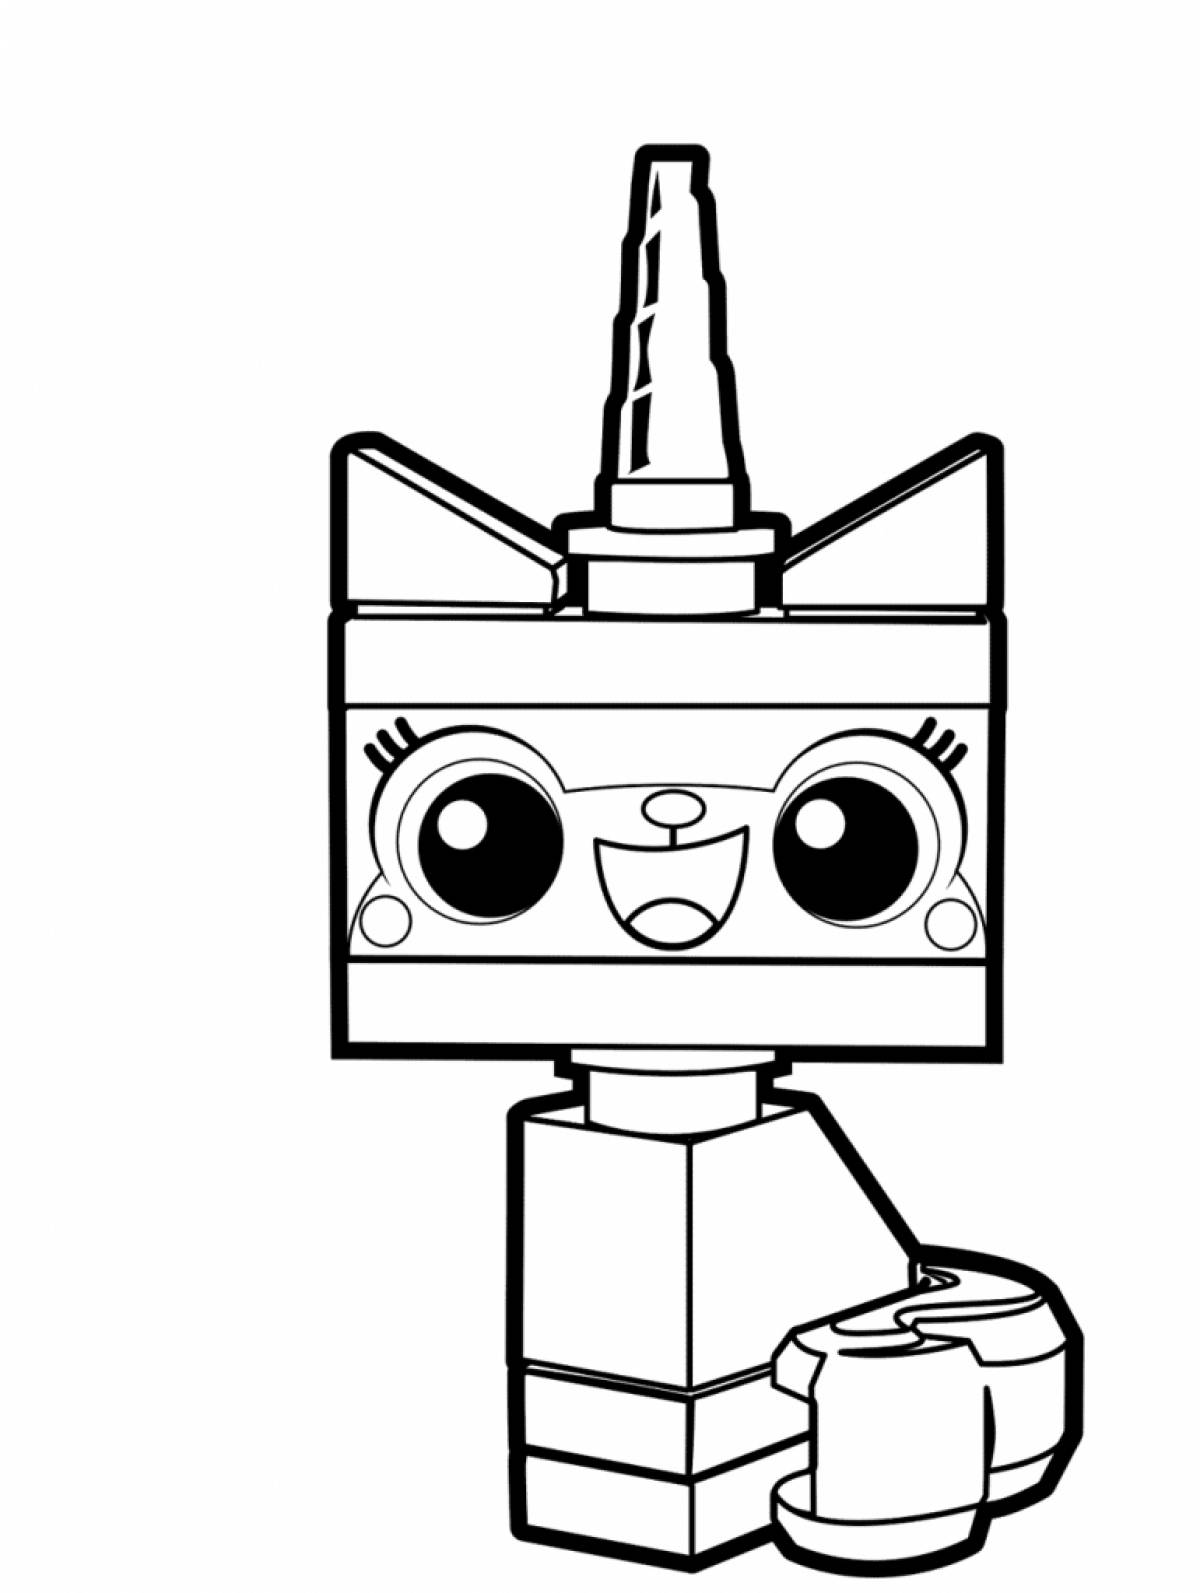 Color-splash unikitty lego coloring page